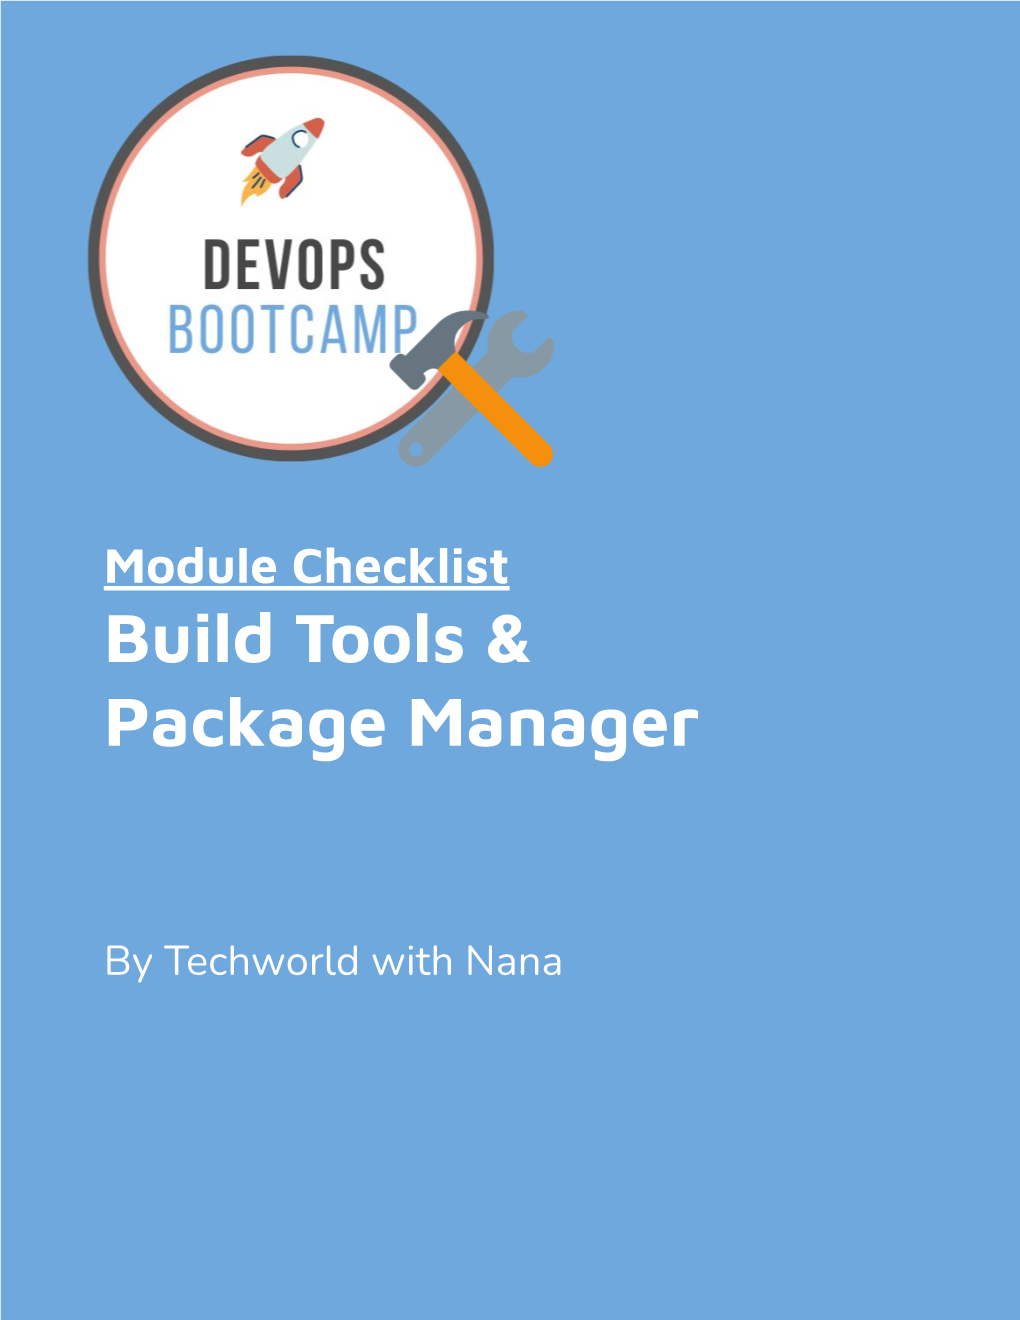 Build Tools & Package Manager